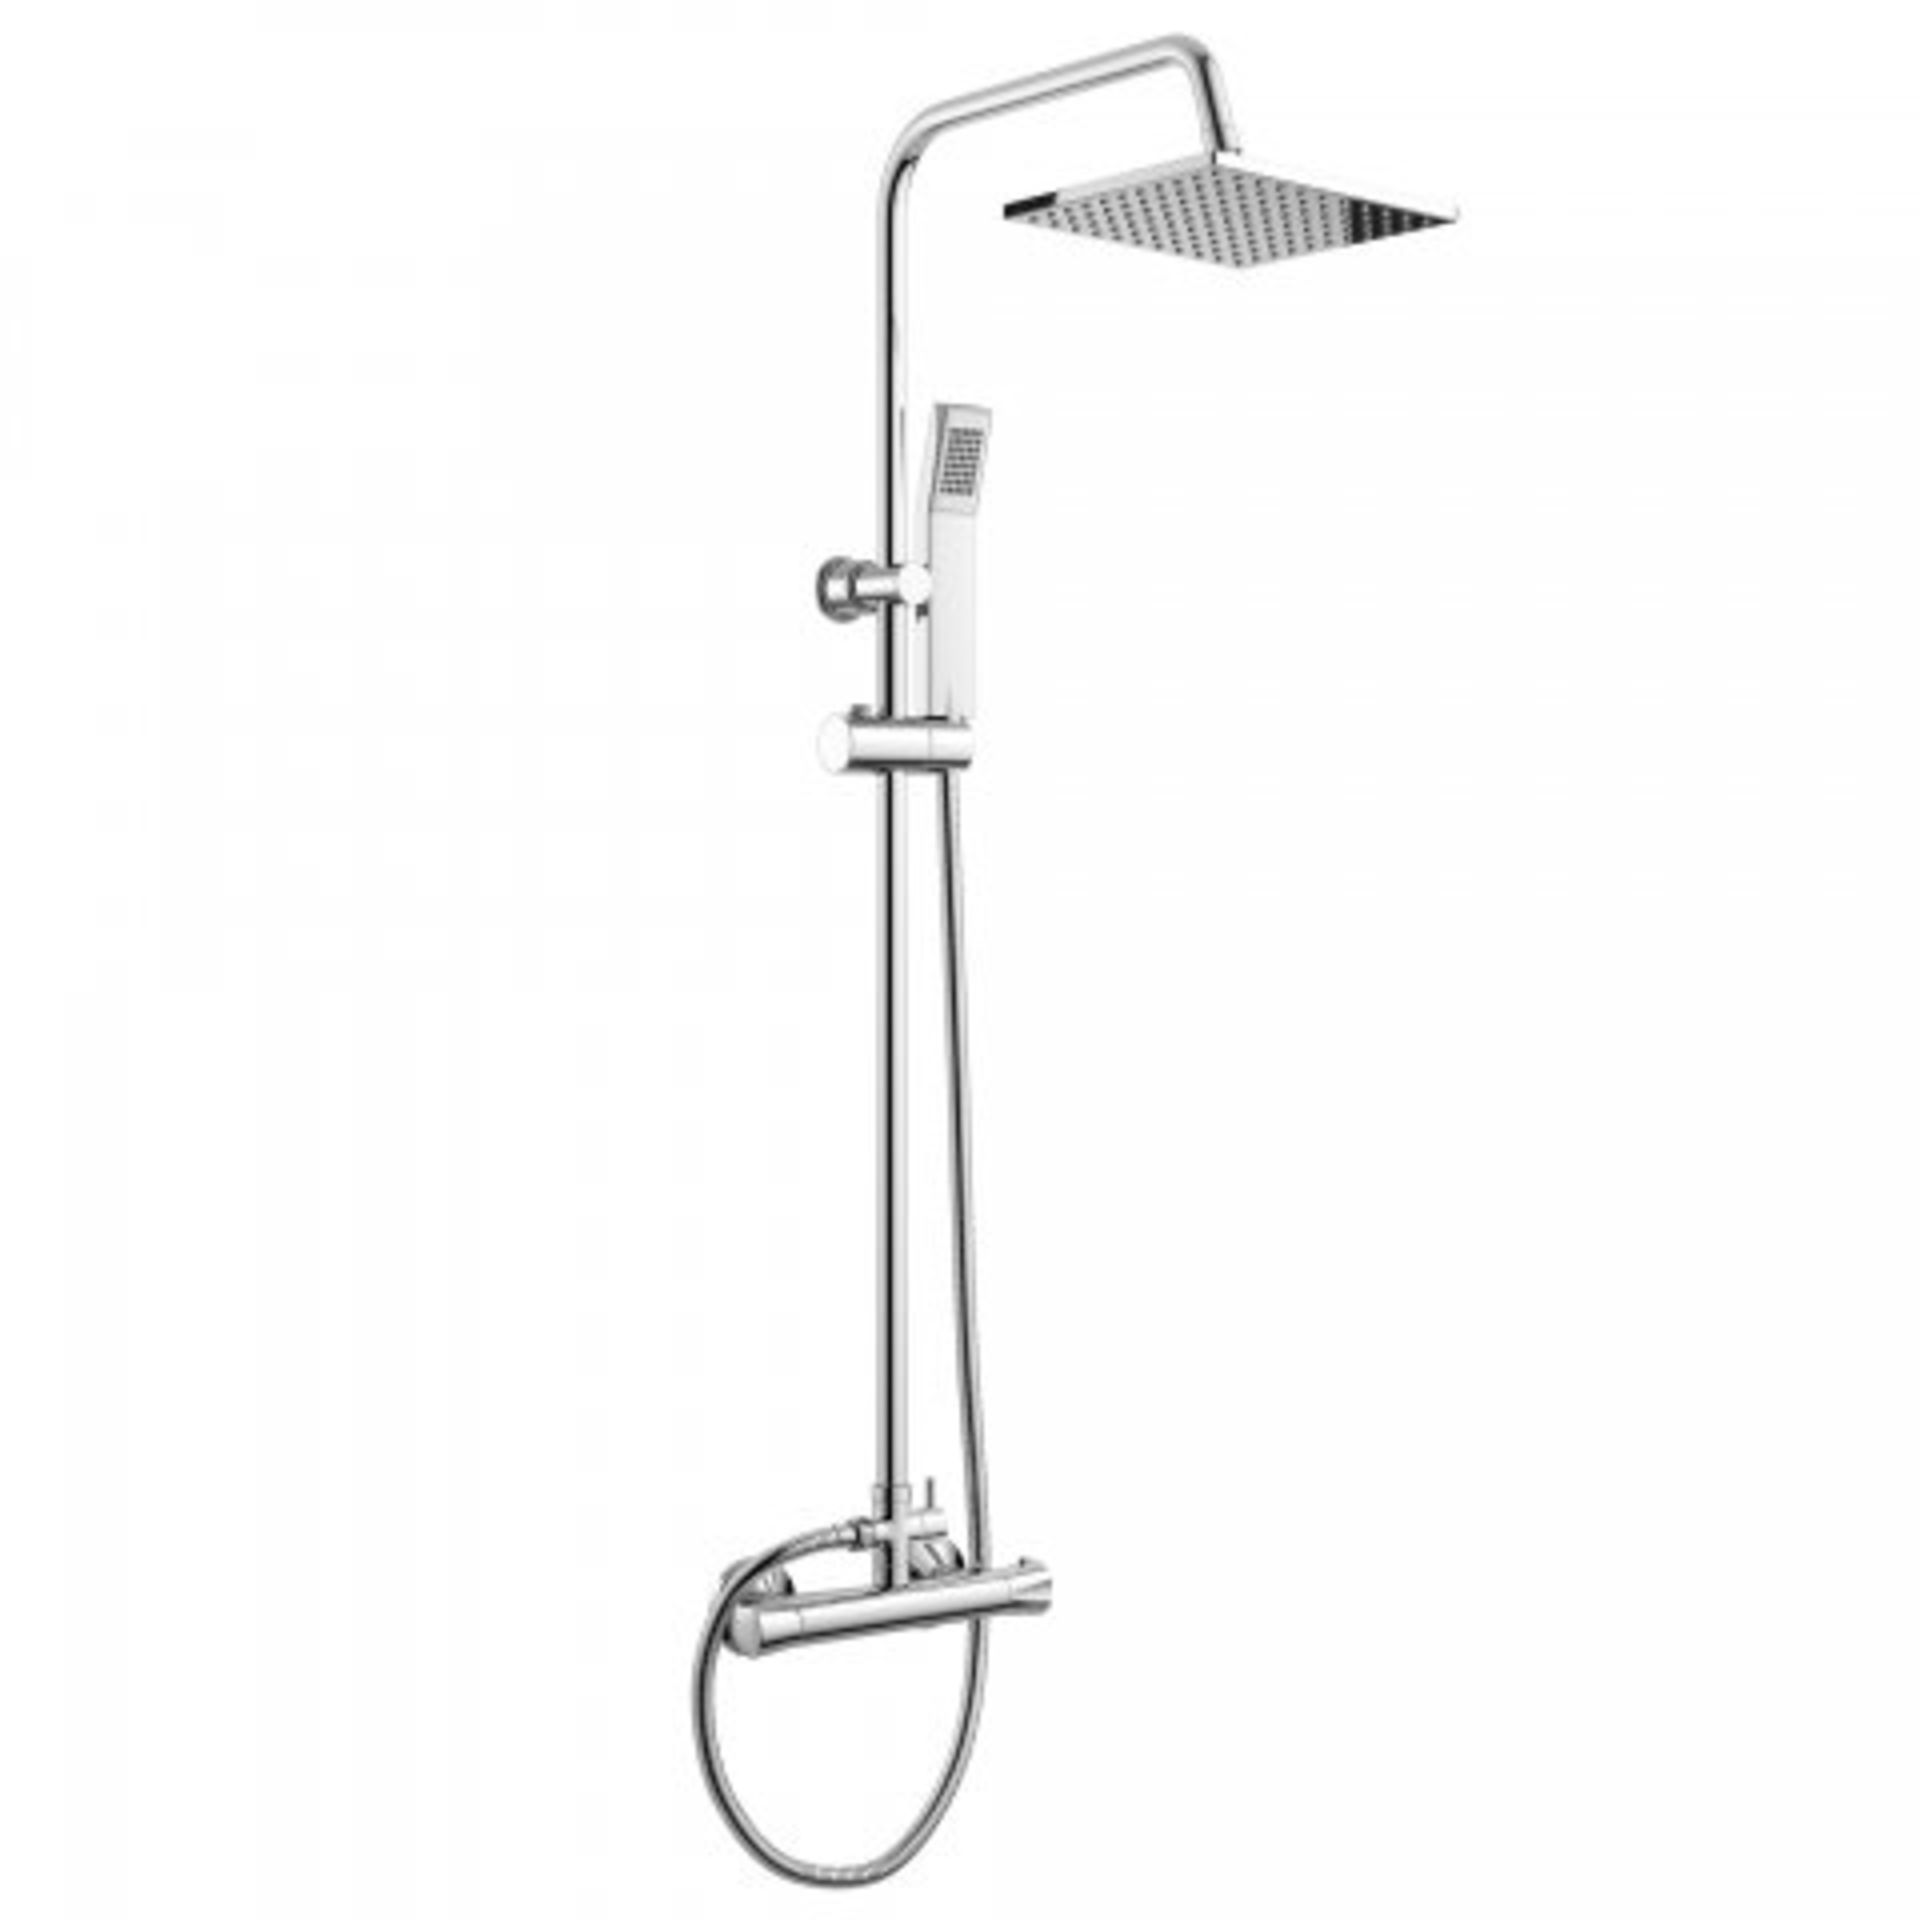 (P19) 200mm Square Head Thermostatic Exposed Shower Kit & Hand Held. RRP £299.99. Simplistic Style - Image 3 of 5